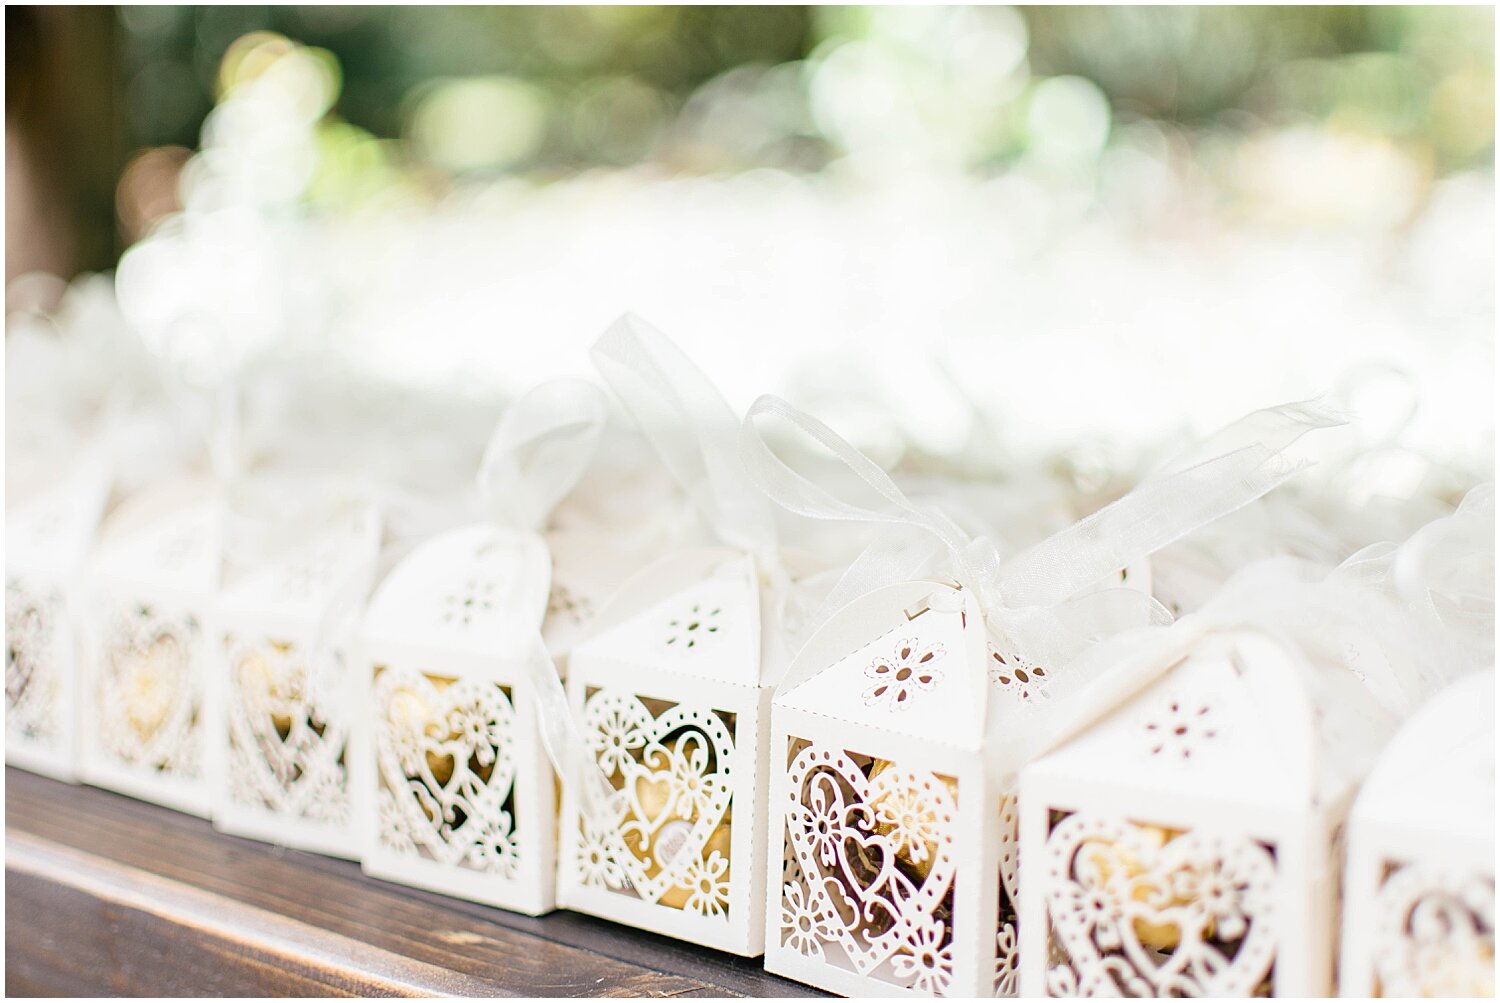  wedding favors for the wedding guests 